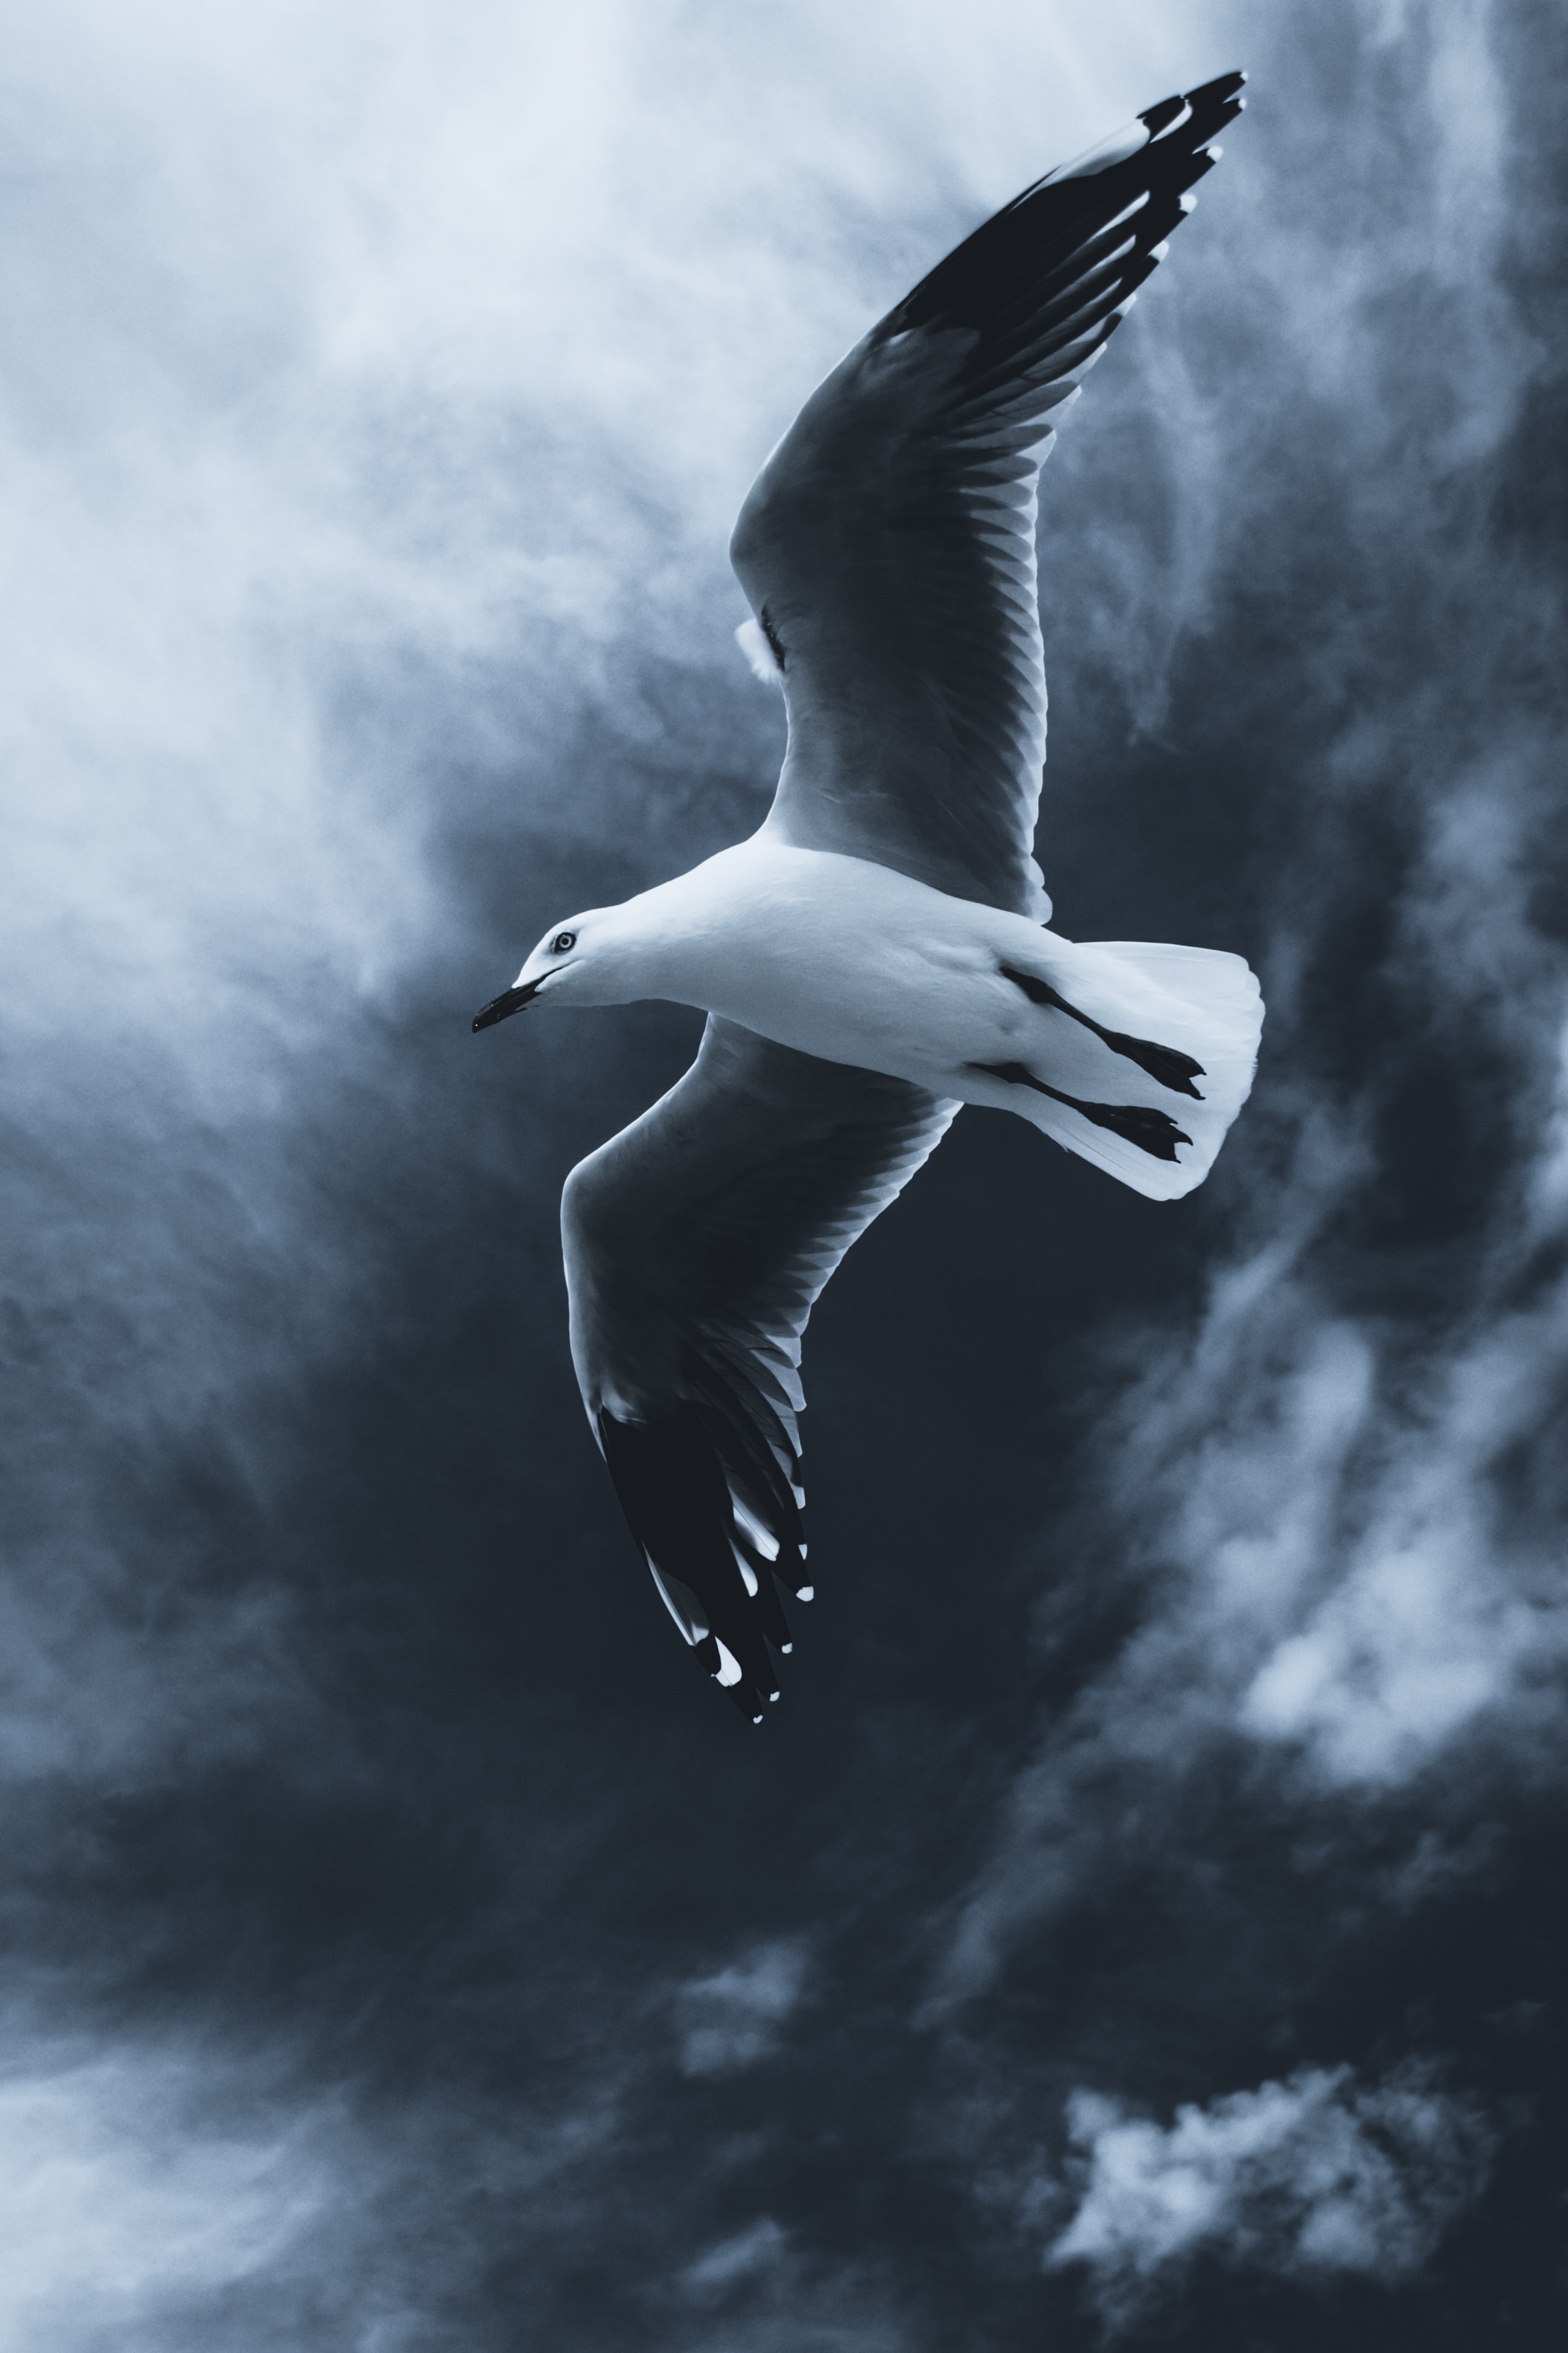 Popular Seagull Image for Phone